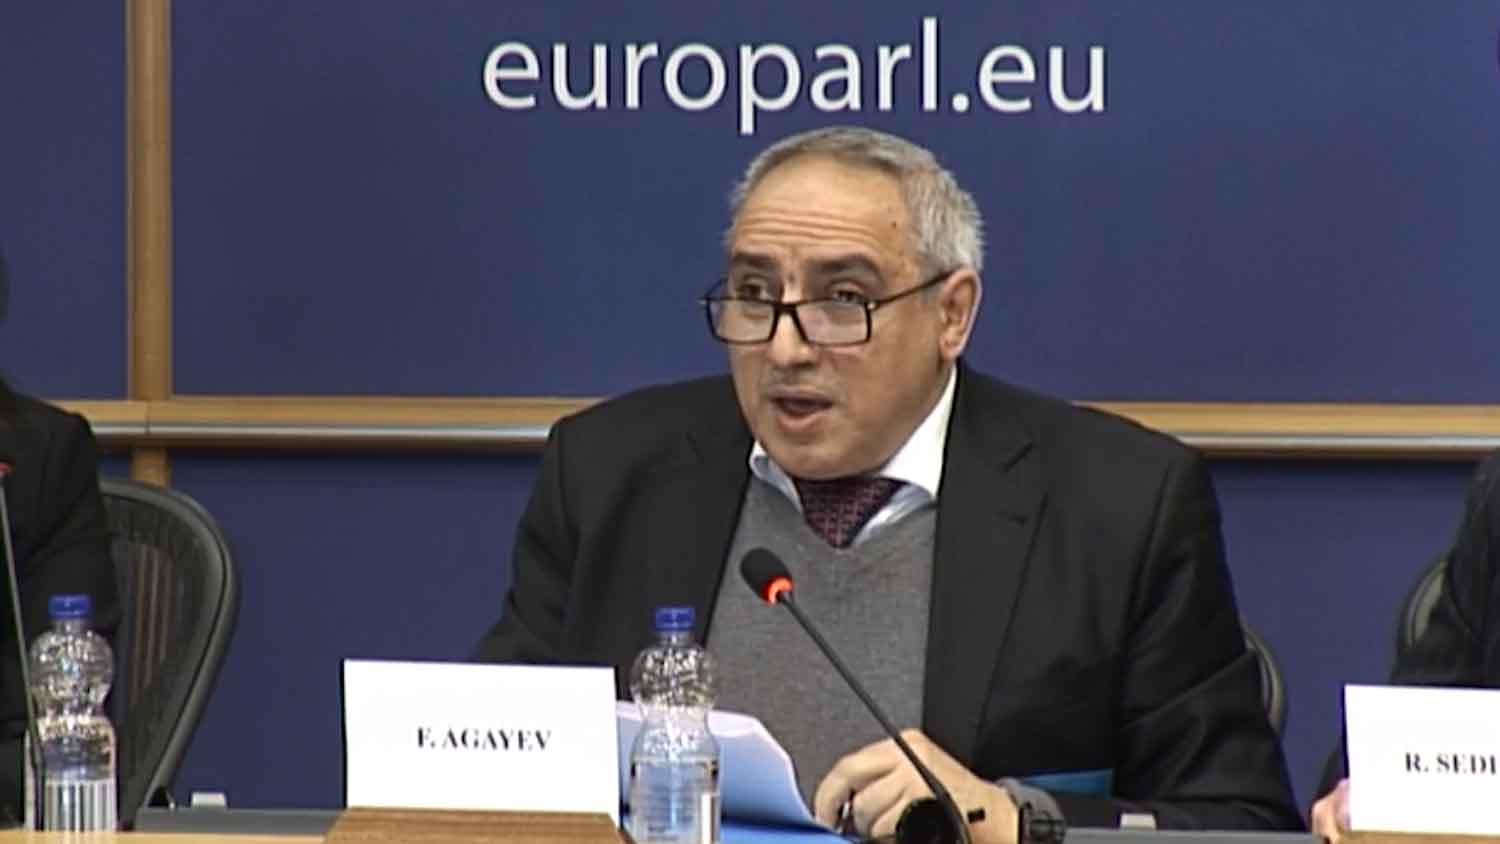 uad Aghayev – Human Rights Lawyer, Azerbaijan Extract from a statement given at the European Parliament Subcommittee on Human Rights on 19 February 2019.